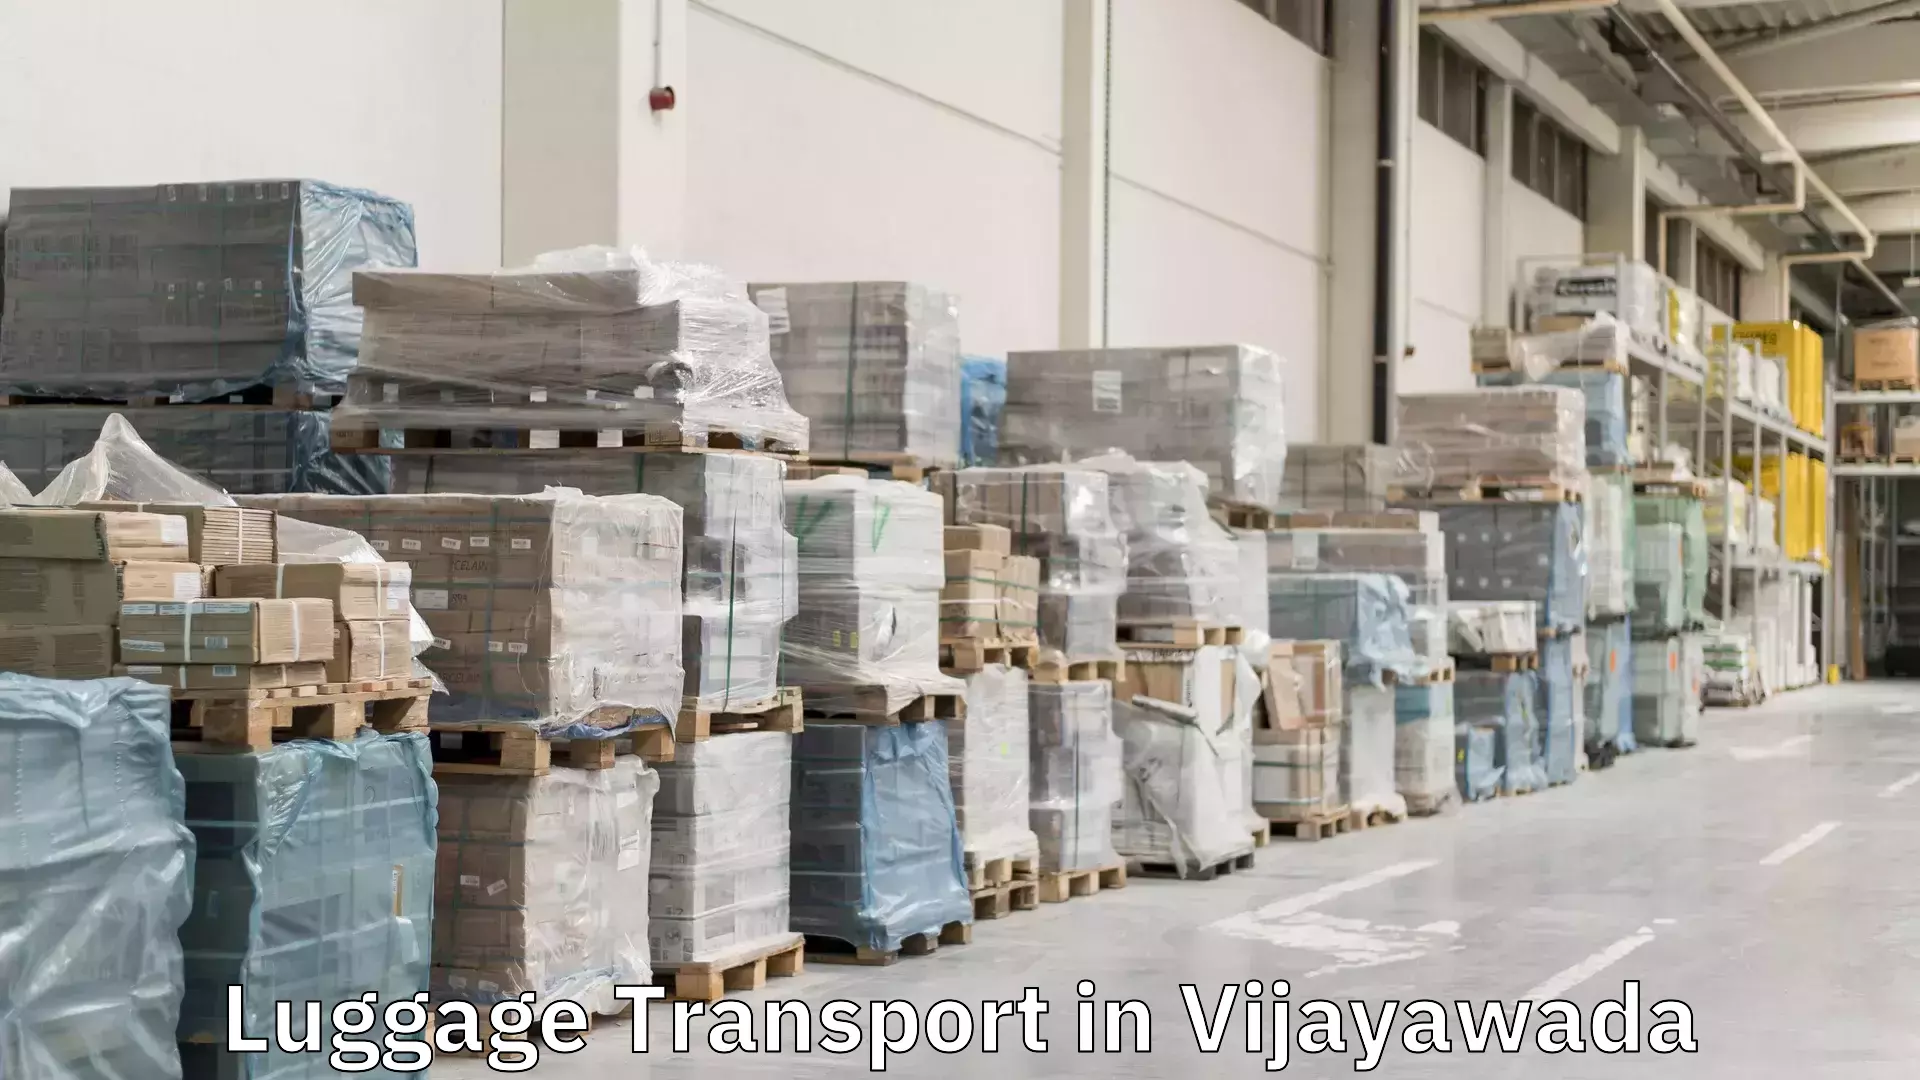 Luggage storage and delivery in Vijayawada